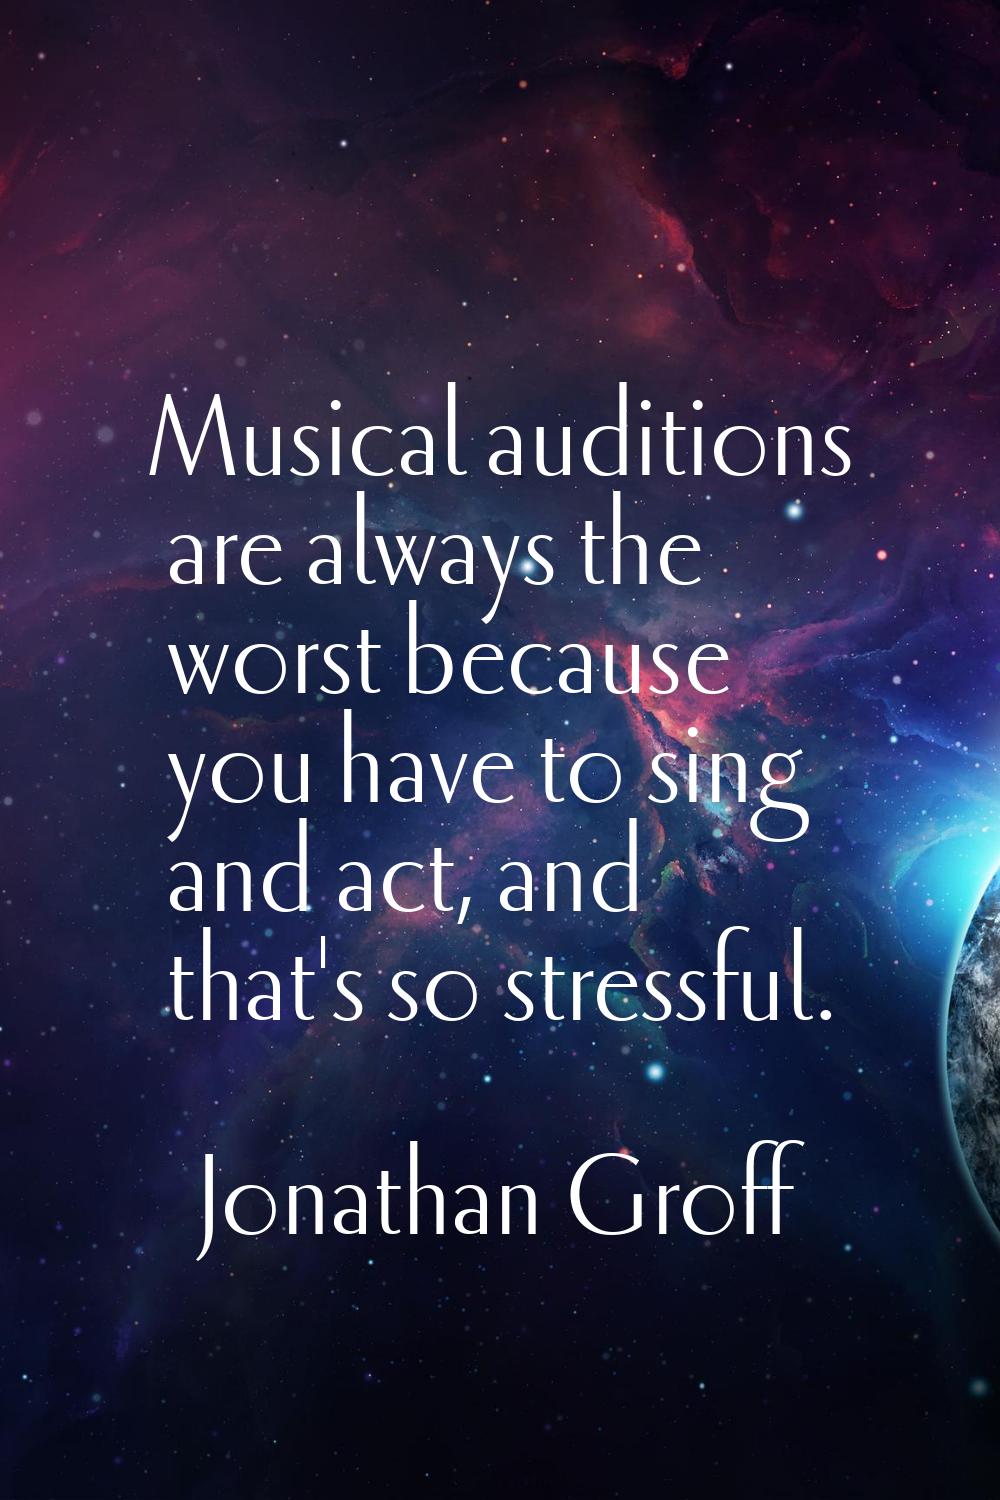 Musical auditions are always the worst because you have to sing and act, and that's so stressful.